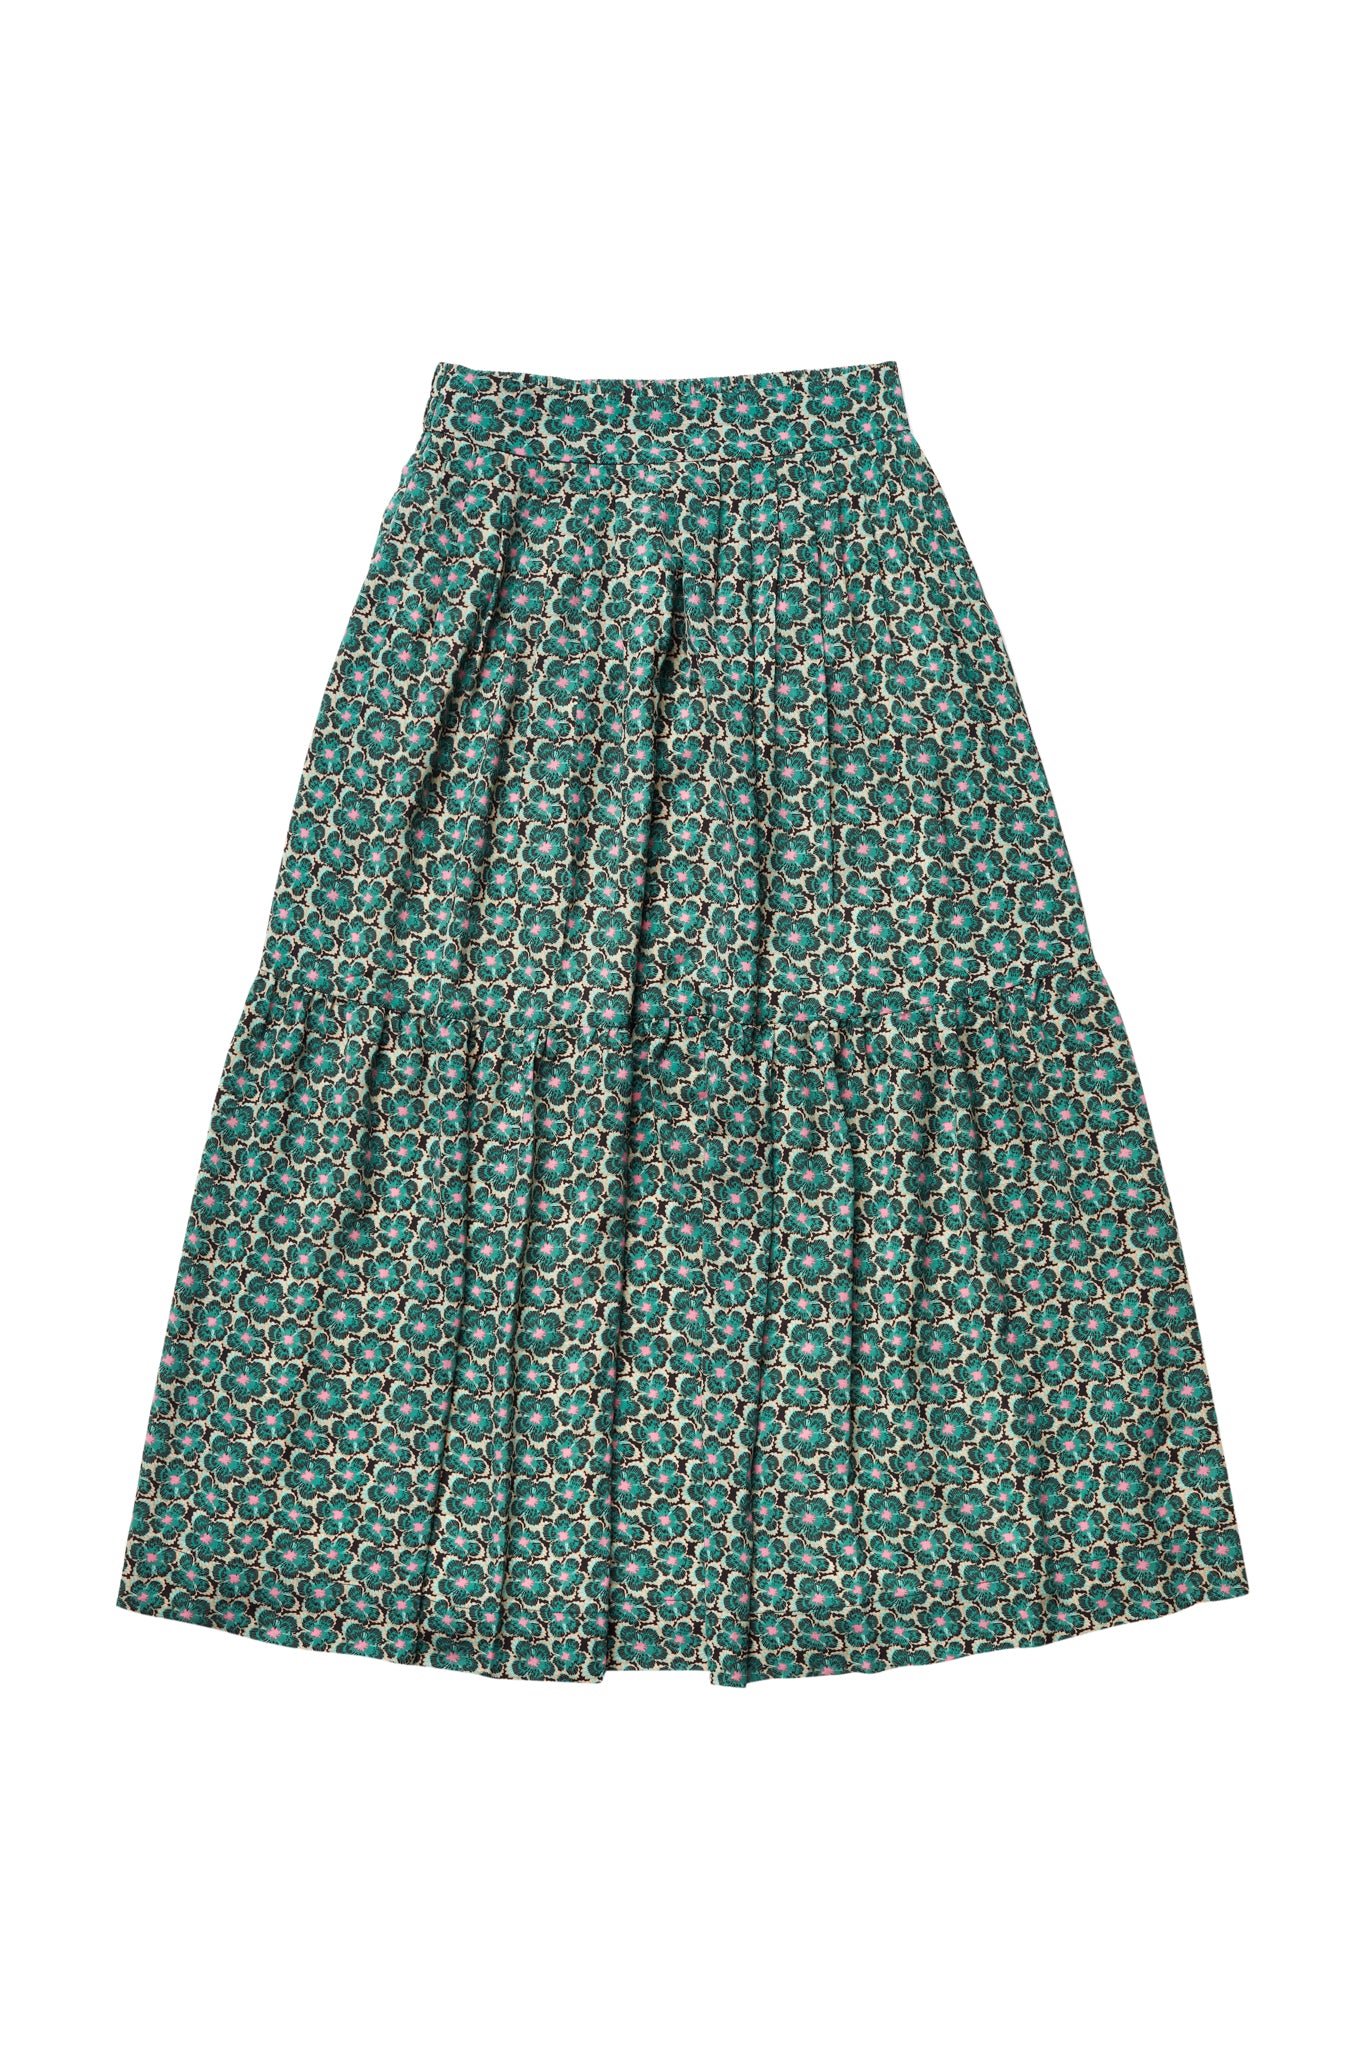 Isabella Skirt in Print on Green #7952